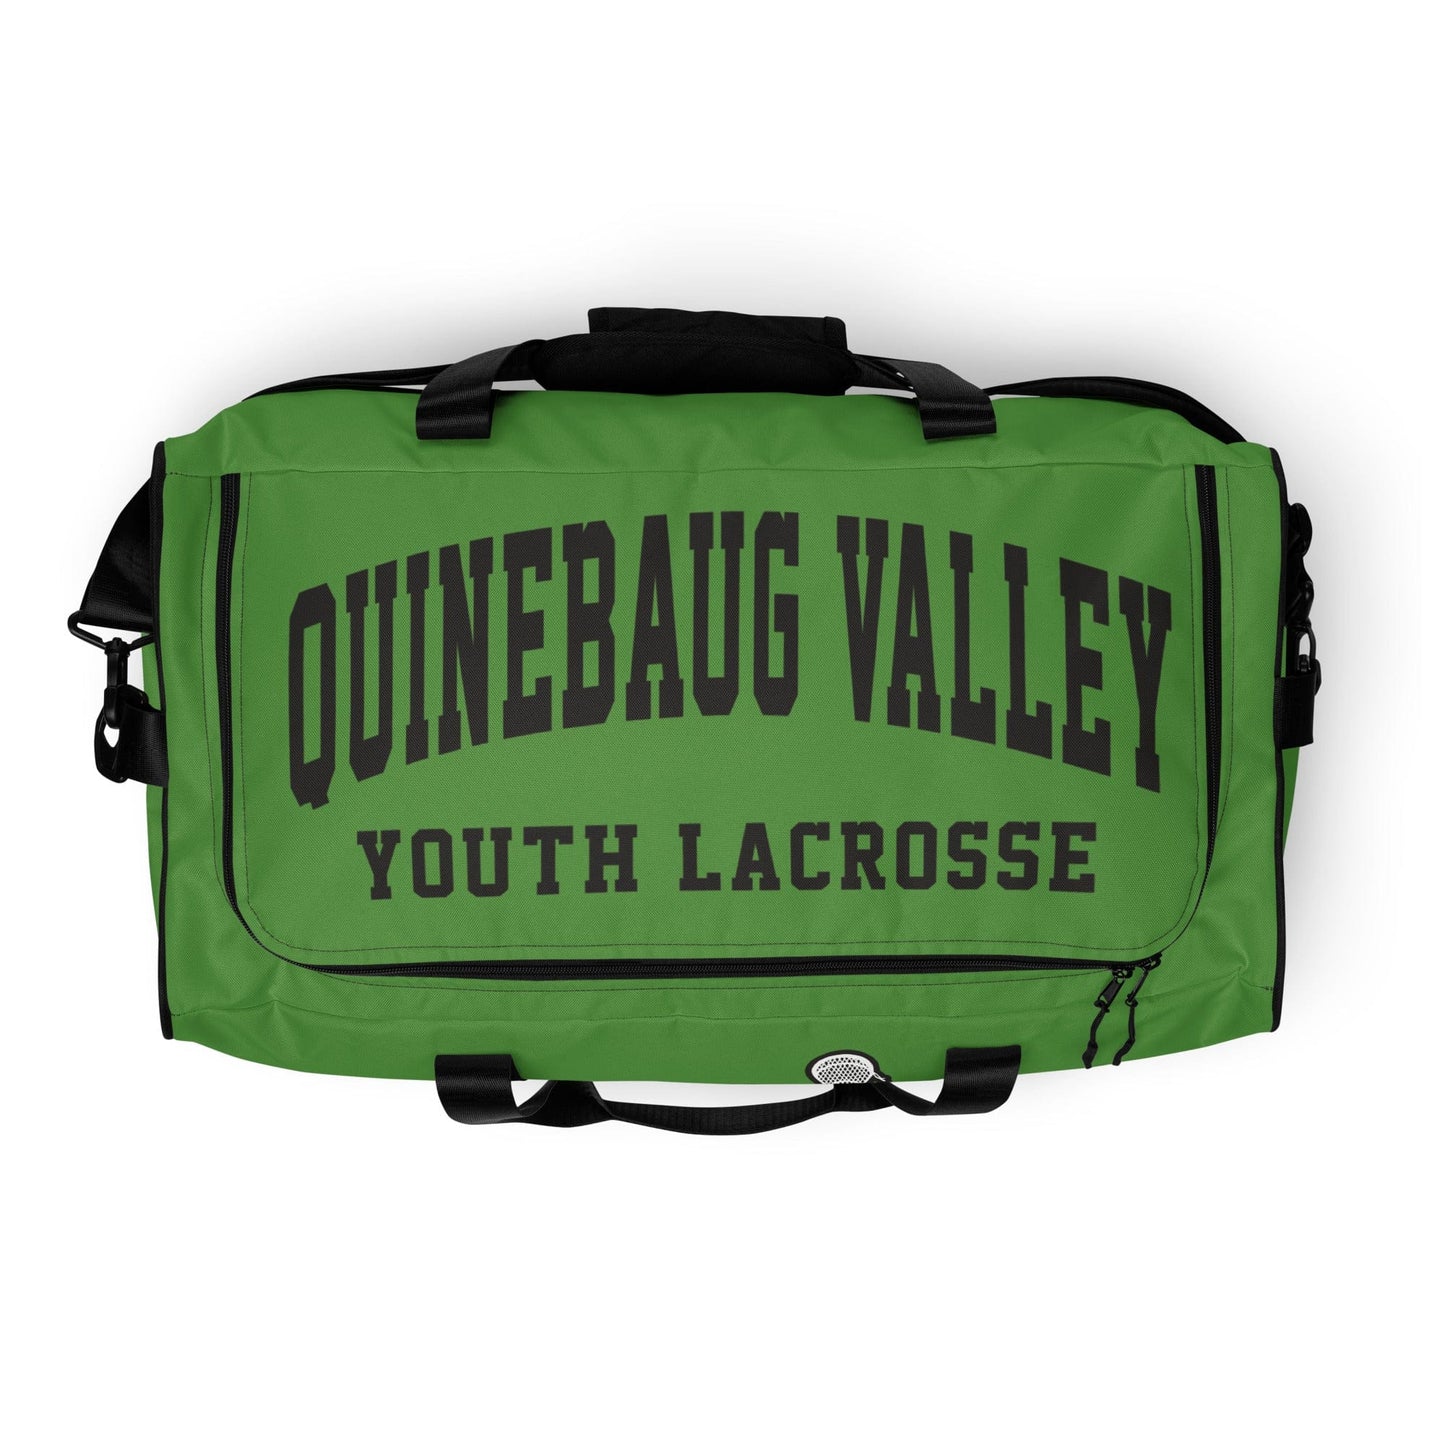 Quinebaug Valley Youth Lacrosse Sideline Bag Signature Lacrosse